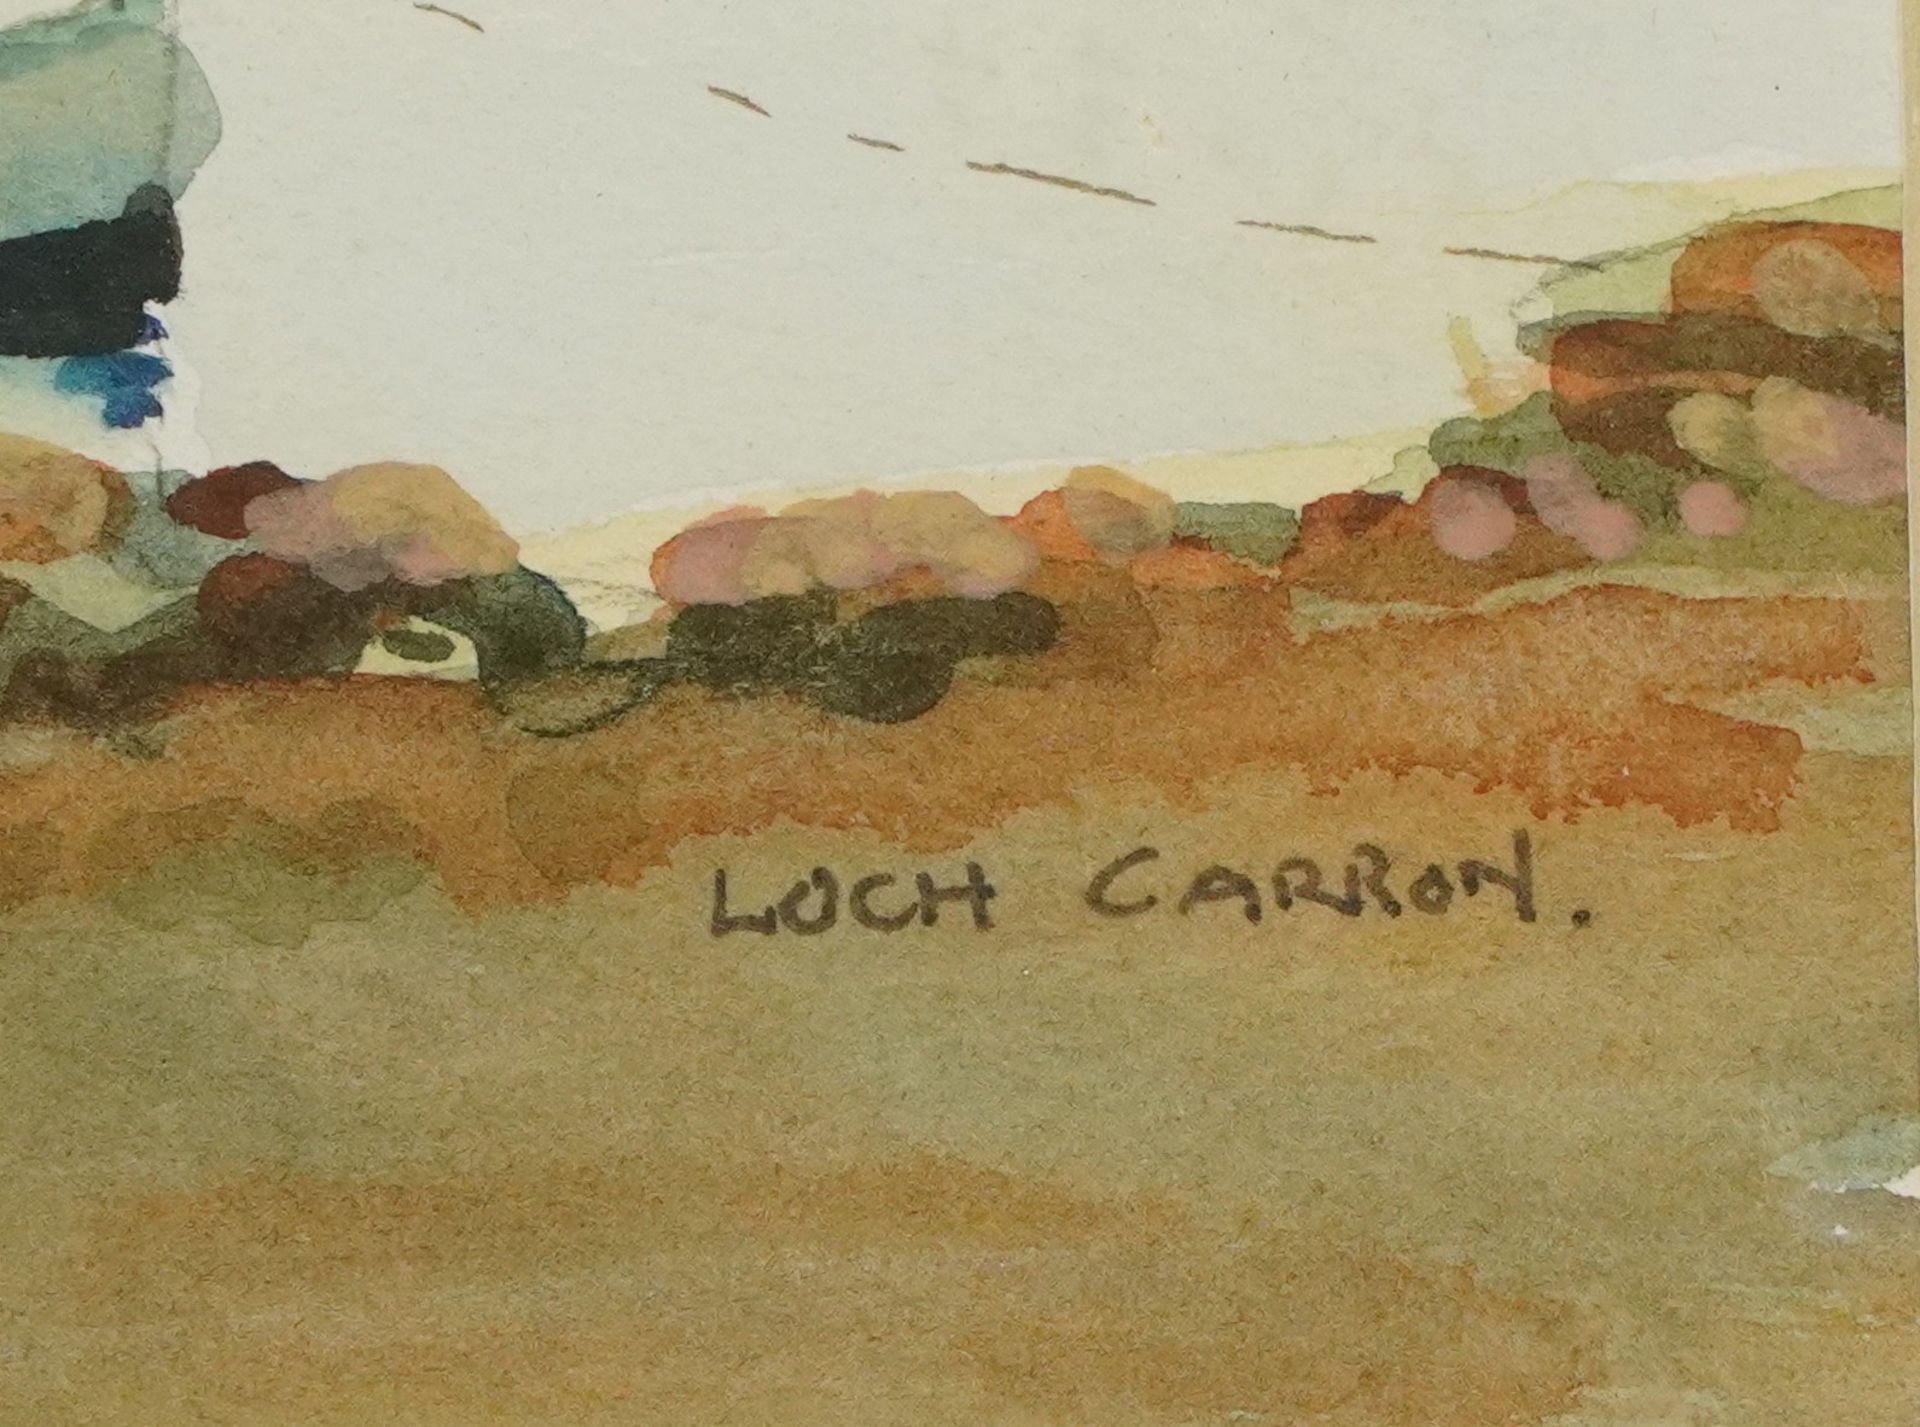 Johnnie Walker - Loch Carron, Scottish watercolour, mounted, framed and glazed, 37cm x 26cm - Image 4 of 6